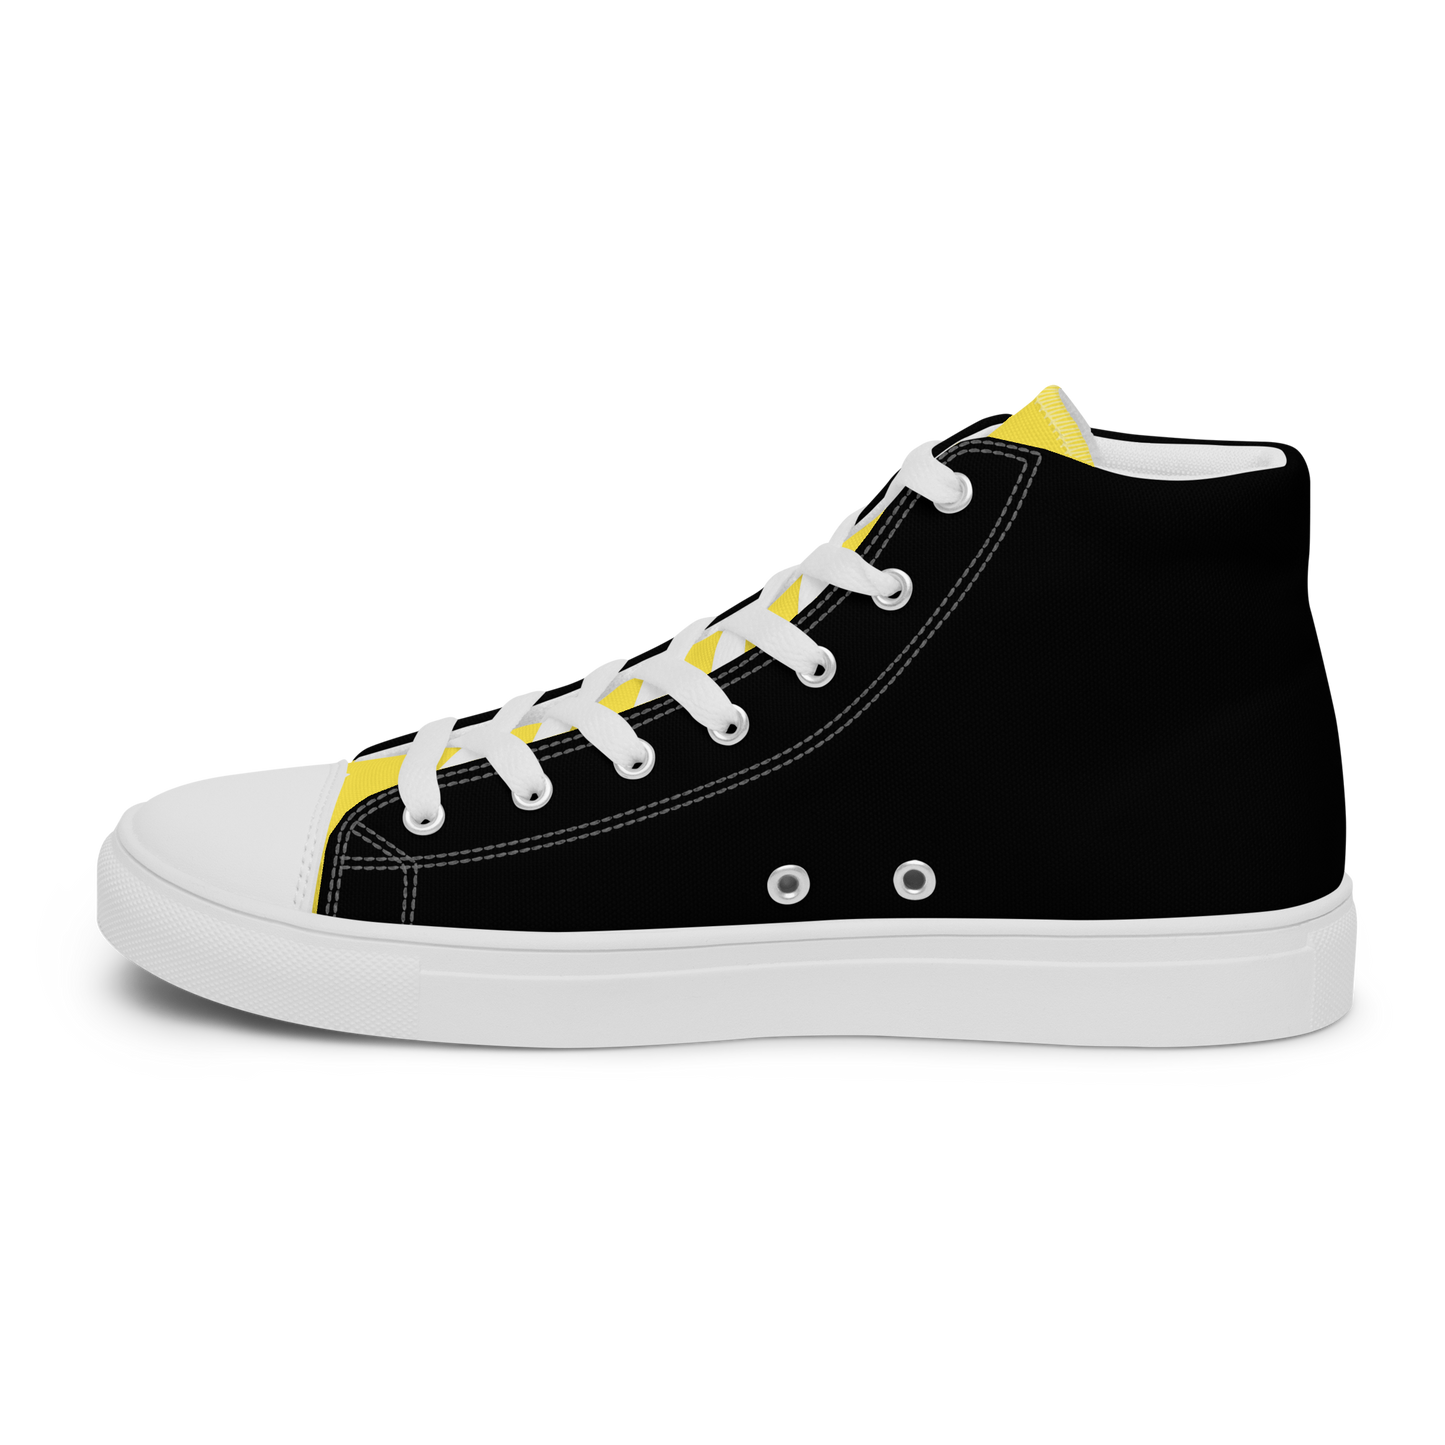 Women’s High Top Canvas Shoes - The Alternative